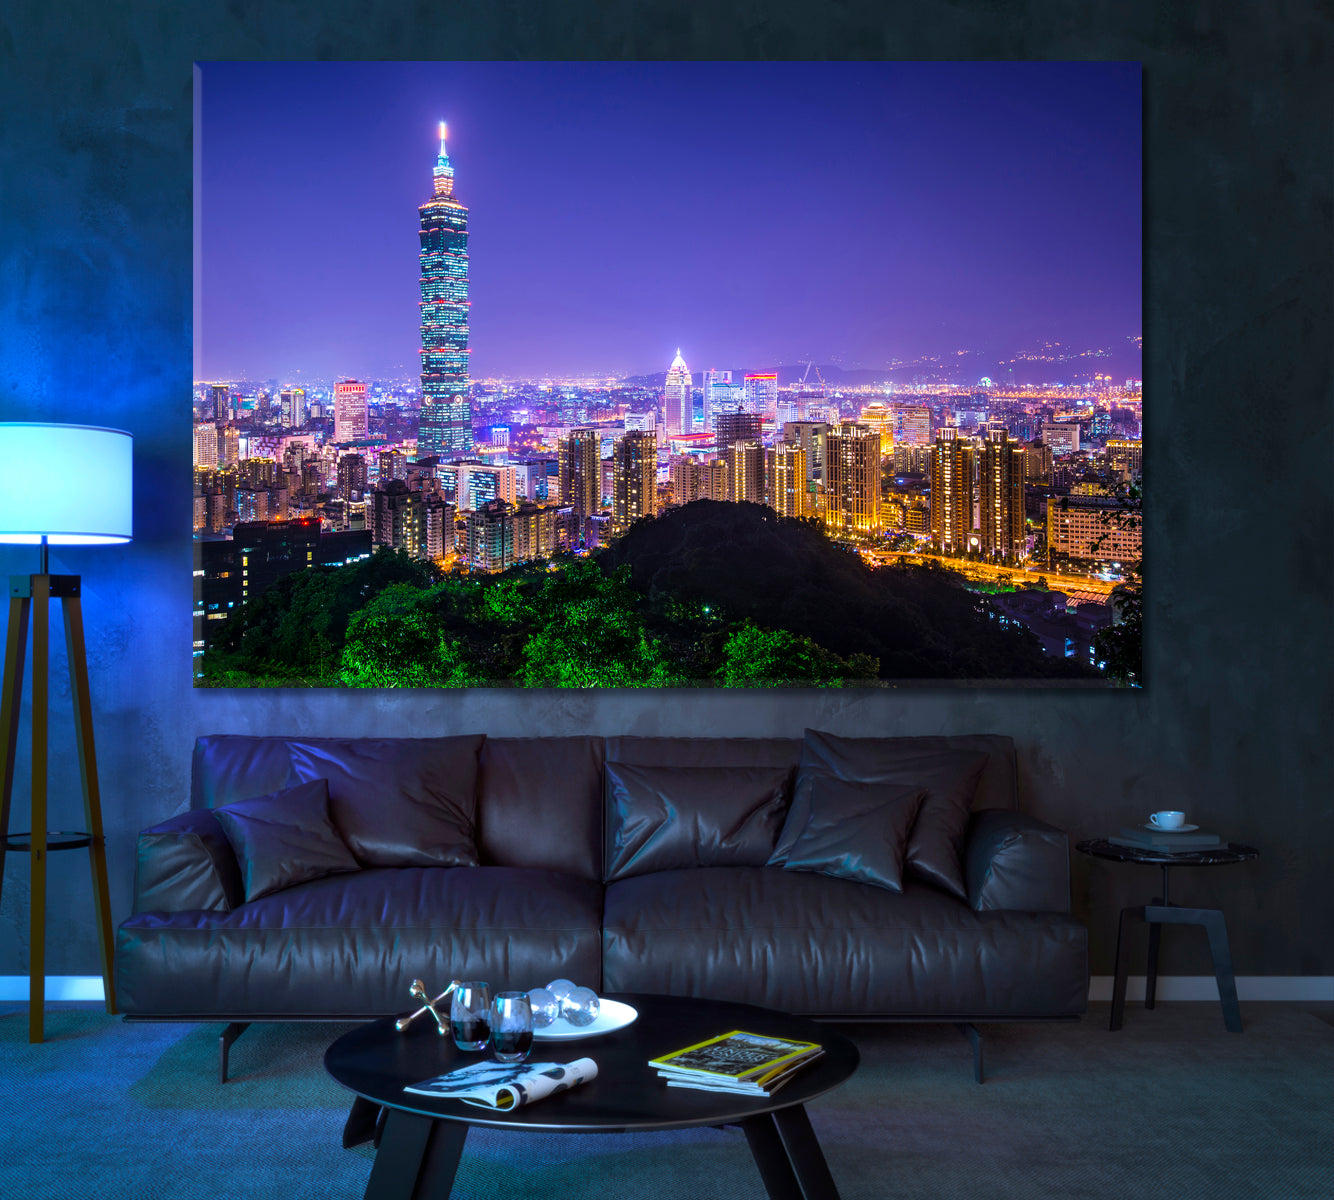 Modern Office Buildings in Taipei Taiwan Canvas Print ArtLexy 1 Panel 24"x16" inches 